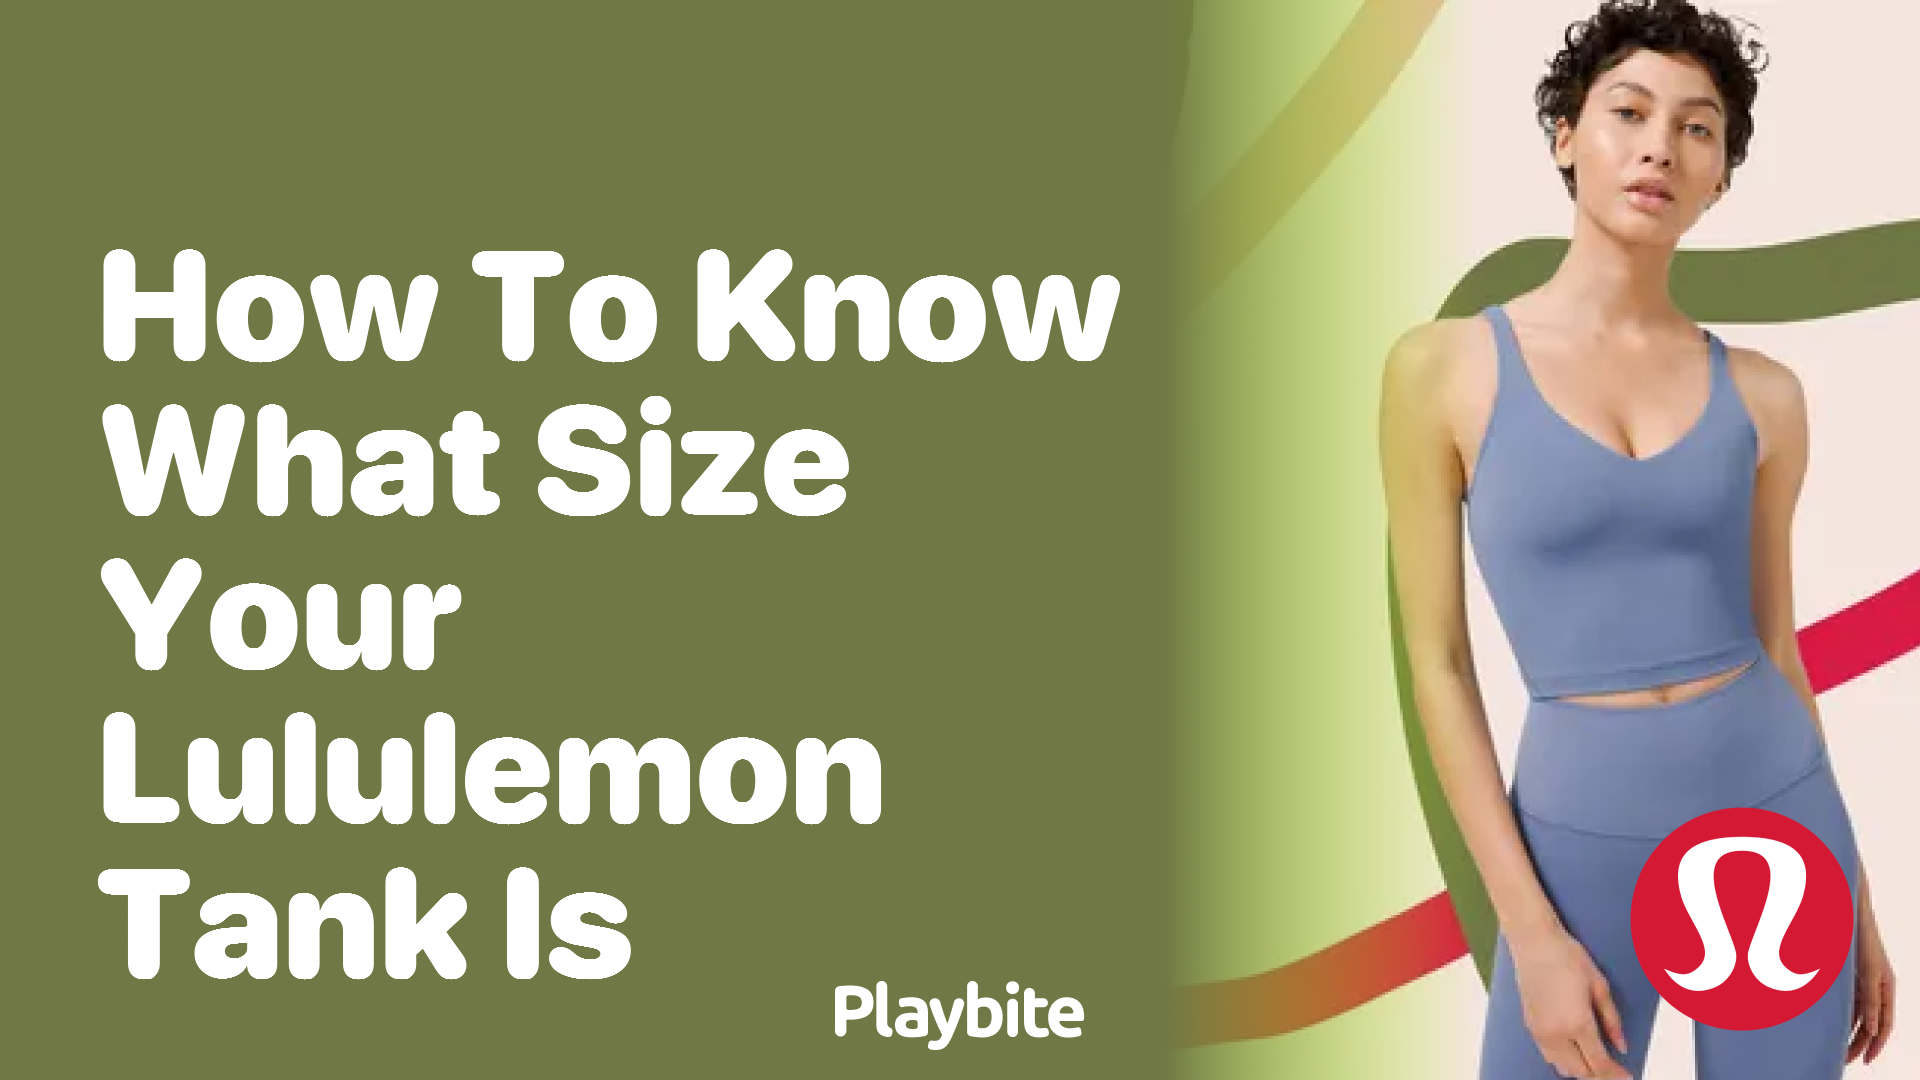 How to Know What Size Your Lululemon Tank Is - Playbite